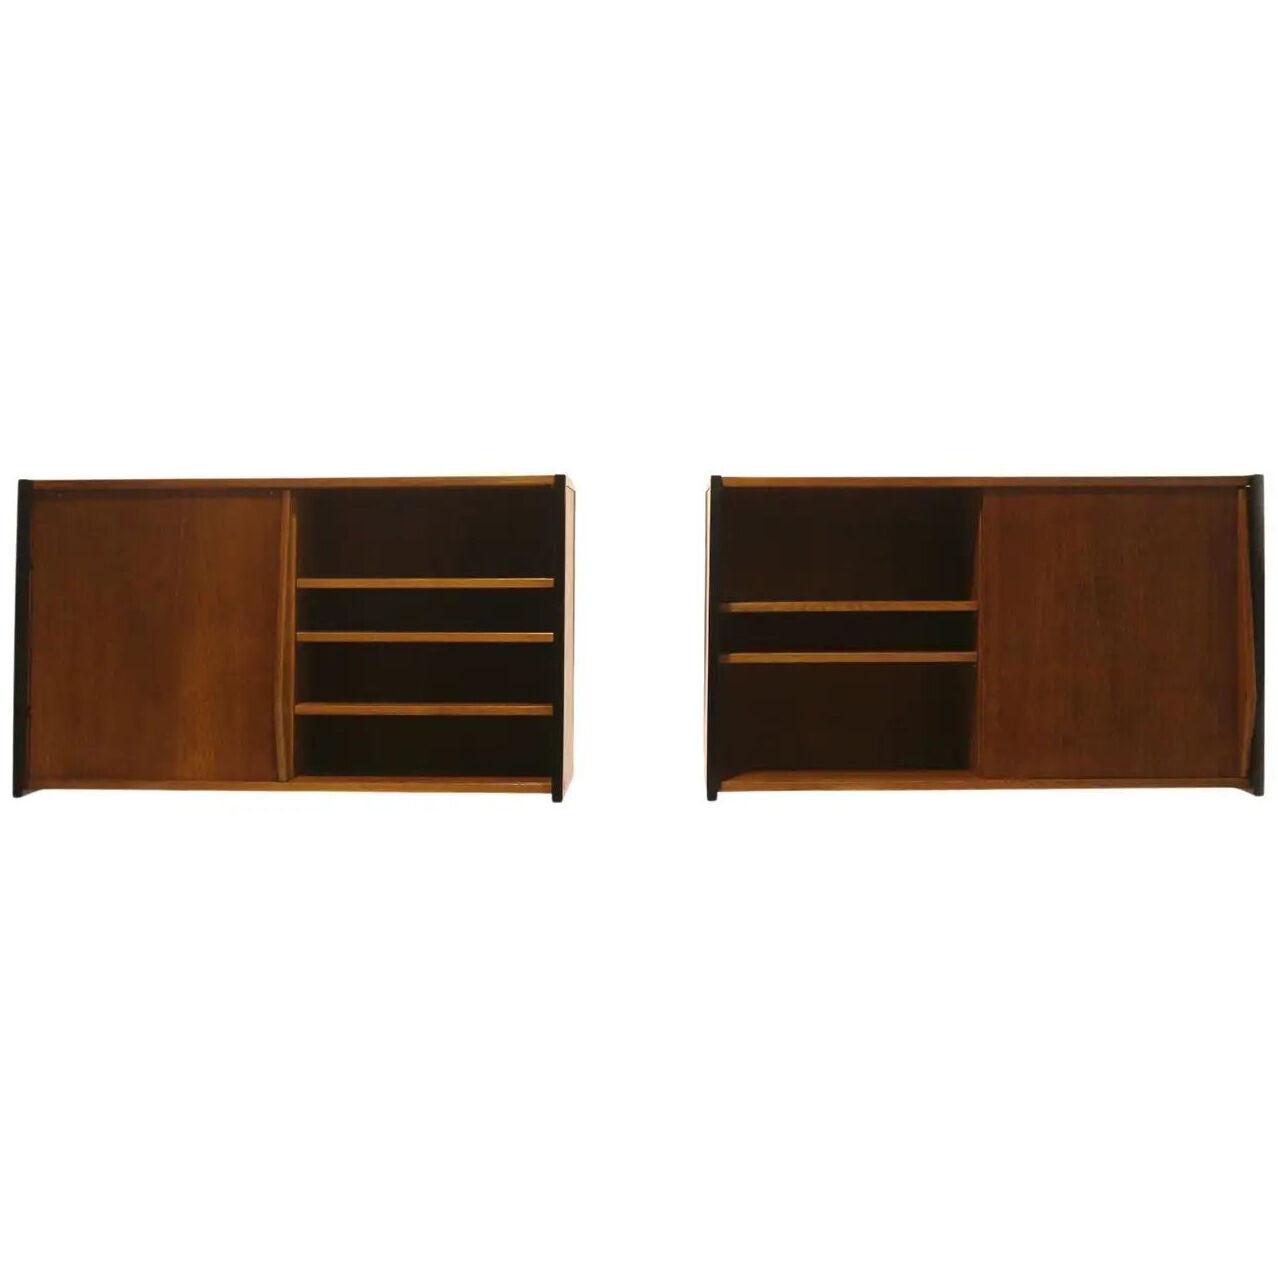 1954, Set of two Wall Cabinets by Jean Prouvé